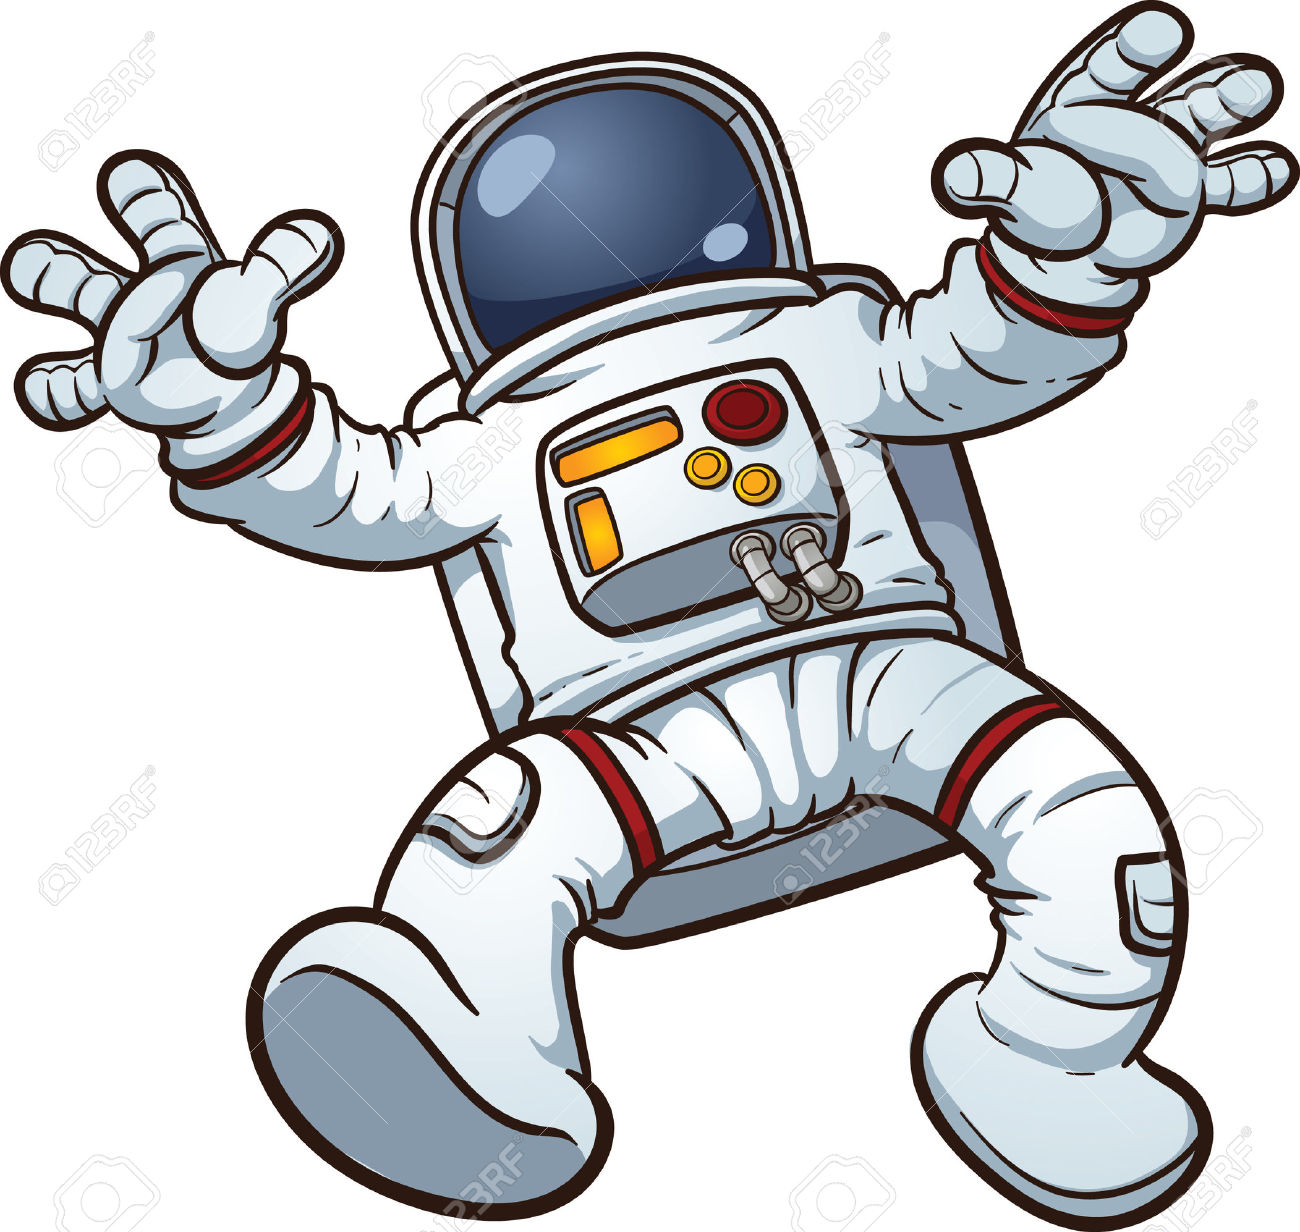 Space suit clipart - Clipground